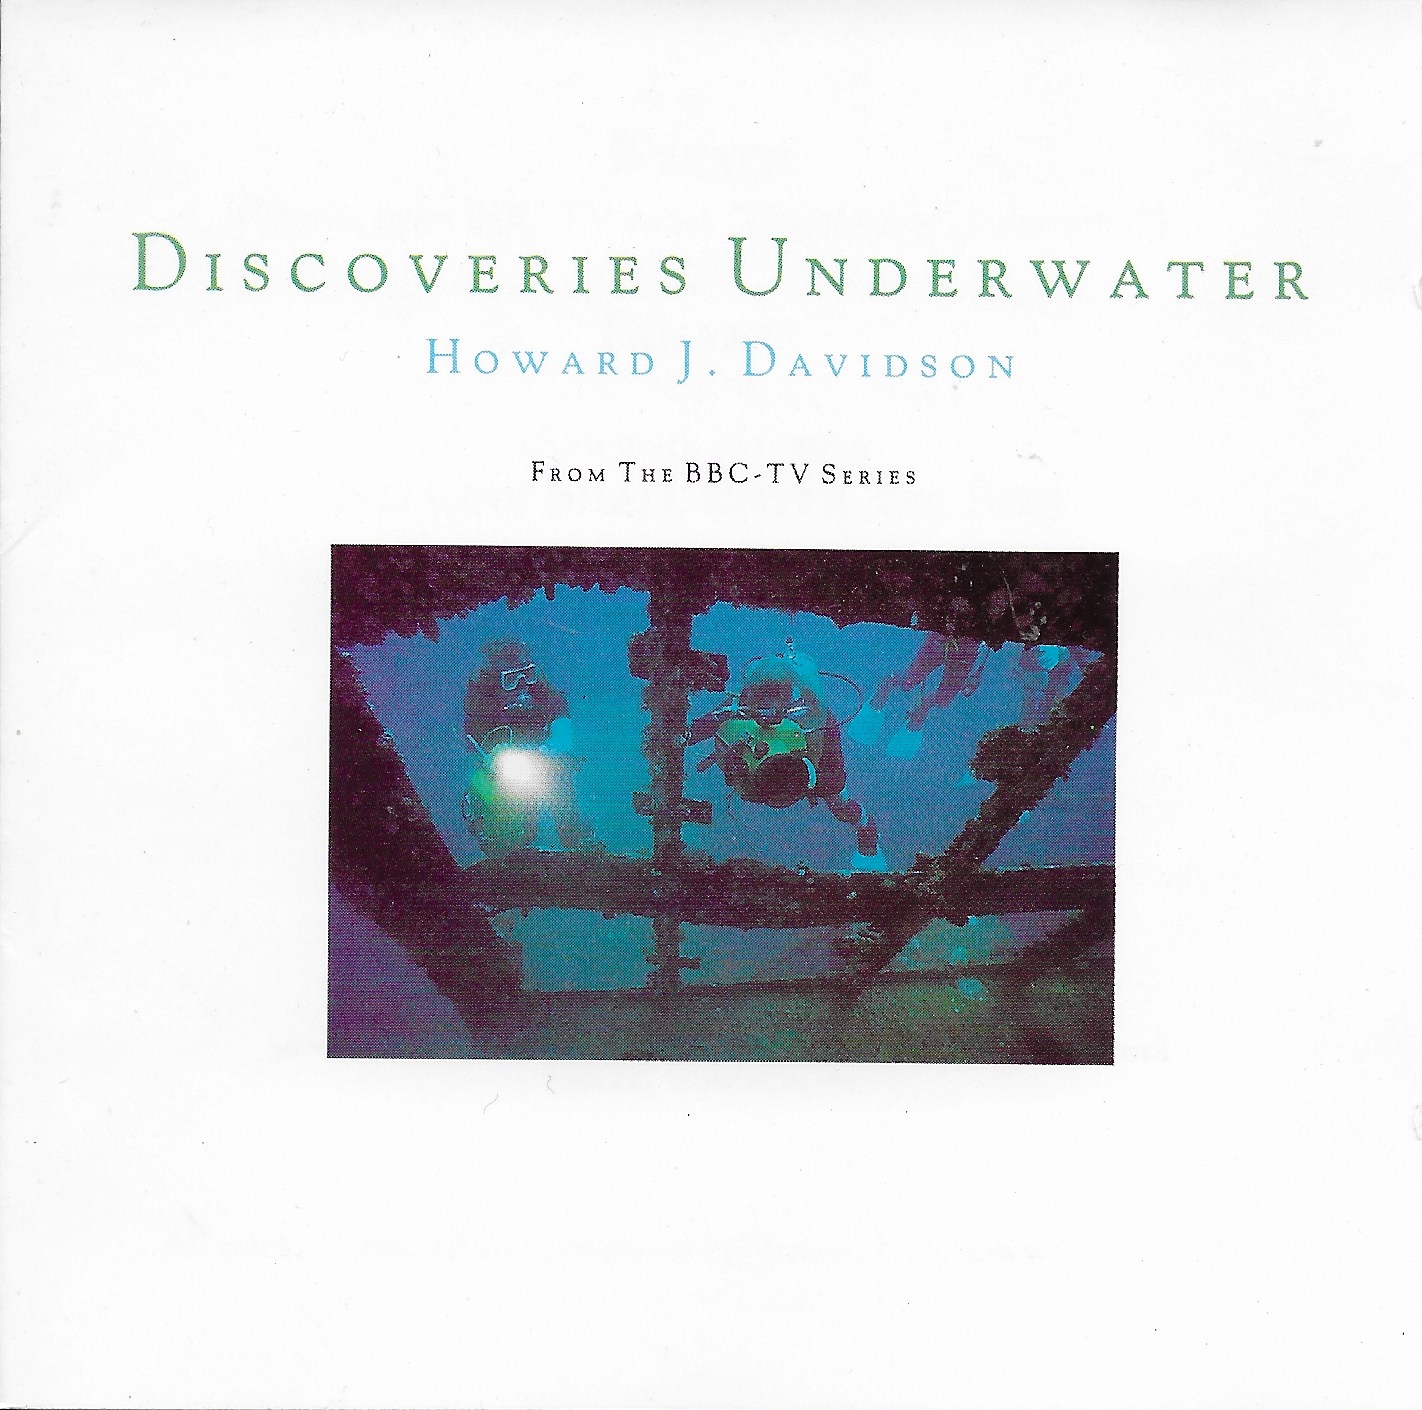 Picture of BBCCD677 Discoveries underwater by artist Howard J. Davidson from the BBC cds - Records and Tapes library